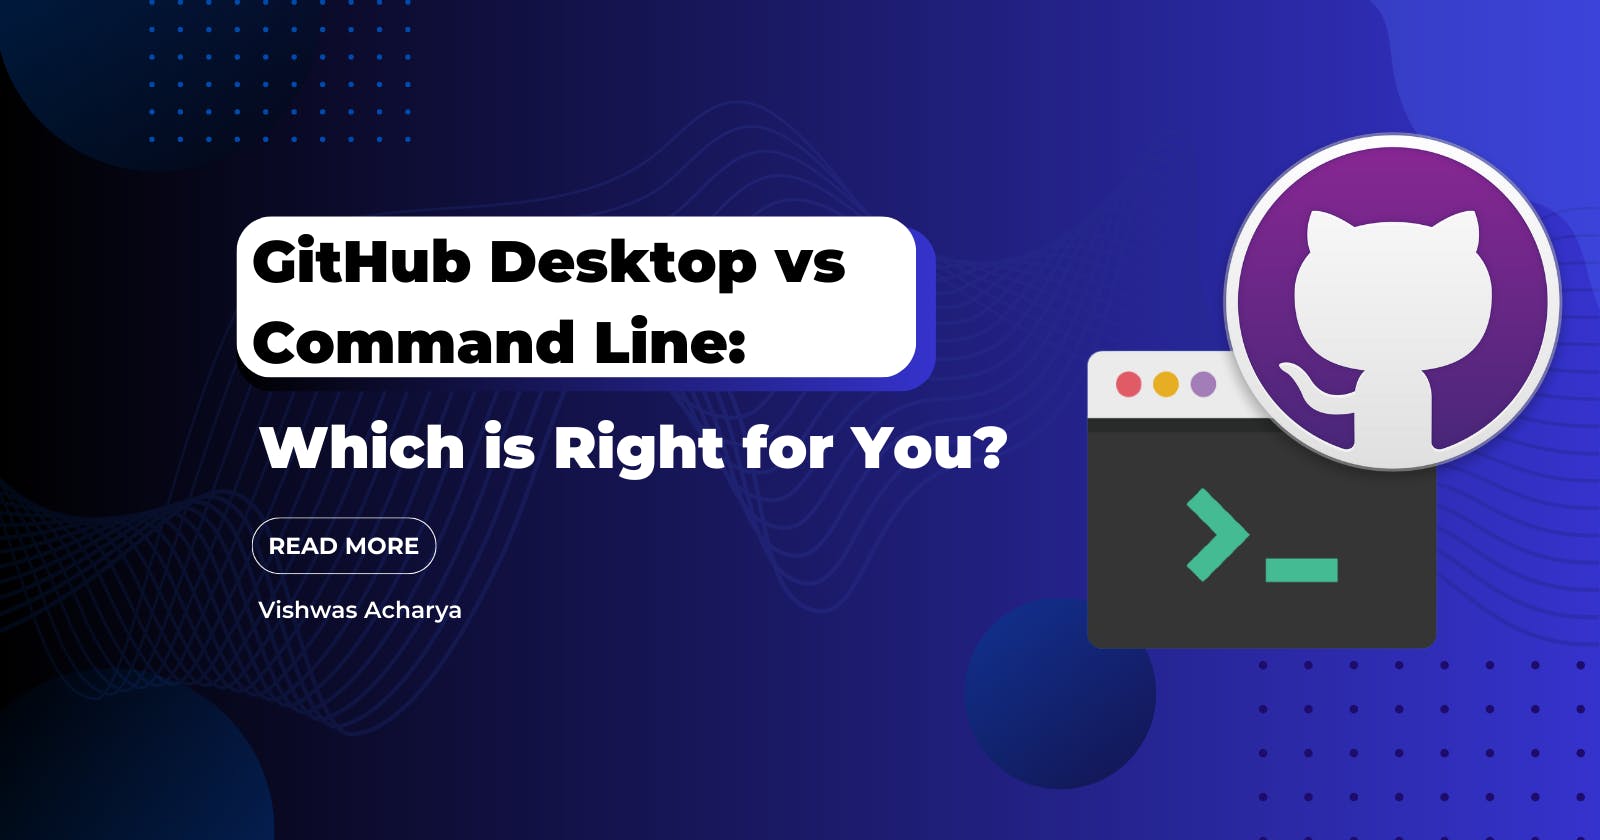 GitHub Desktop vs Command Line: Which is Right for You?